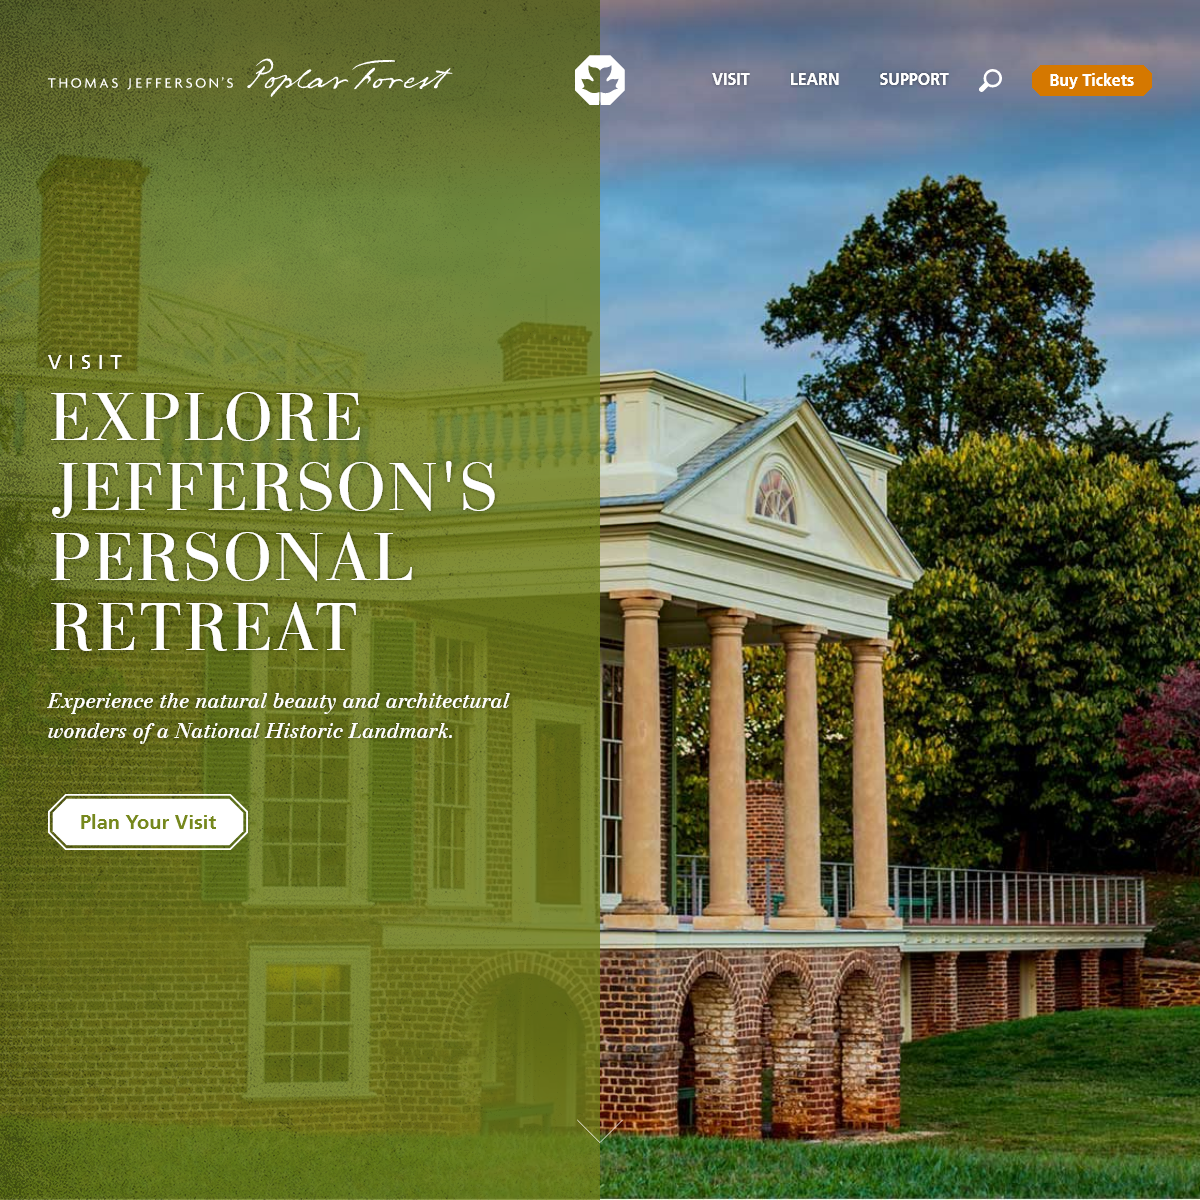 Thomas Jefferson`s Poplar Forest â€“ Experience Thomas Jefferson. Discover his personal retreat. Step into his private world.